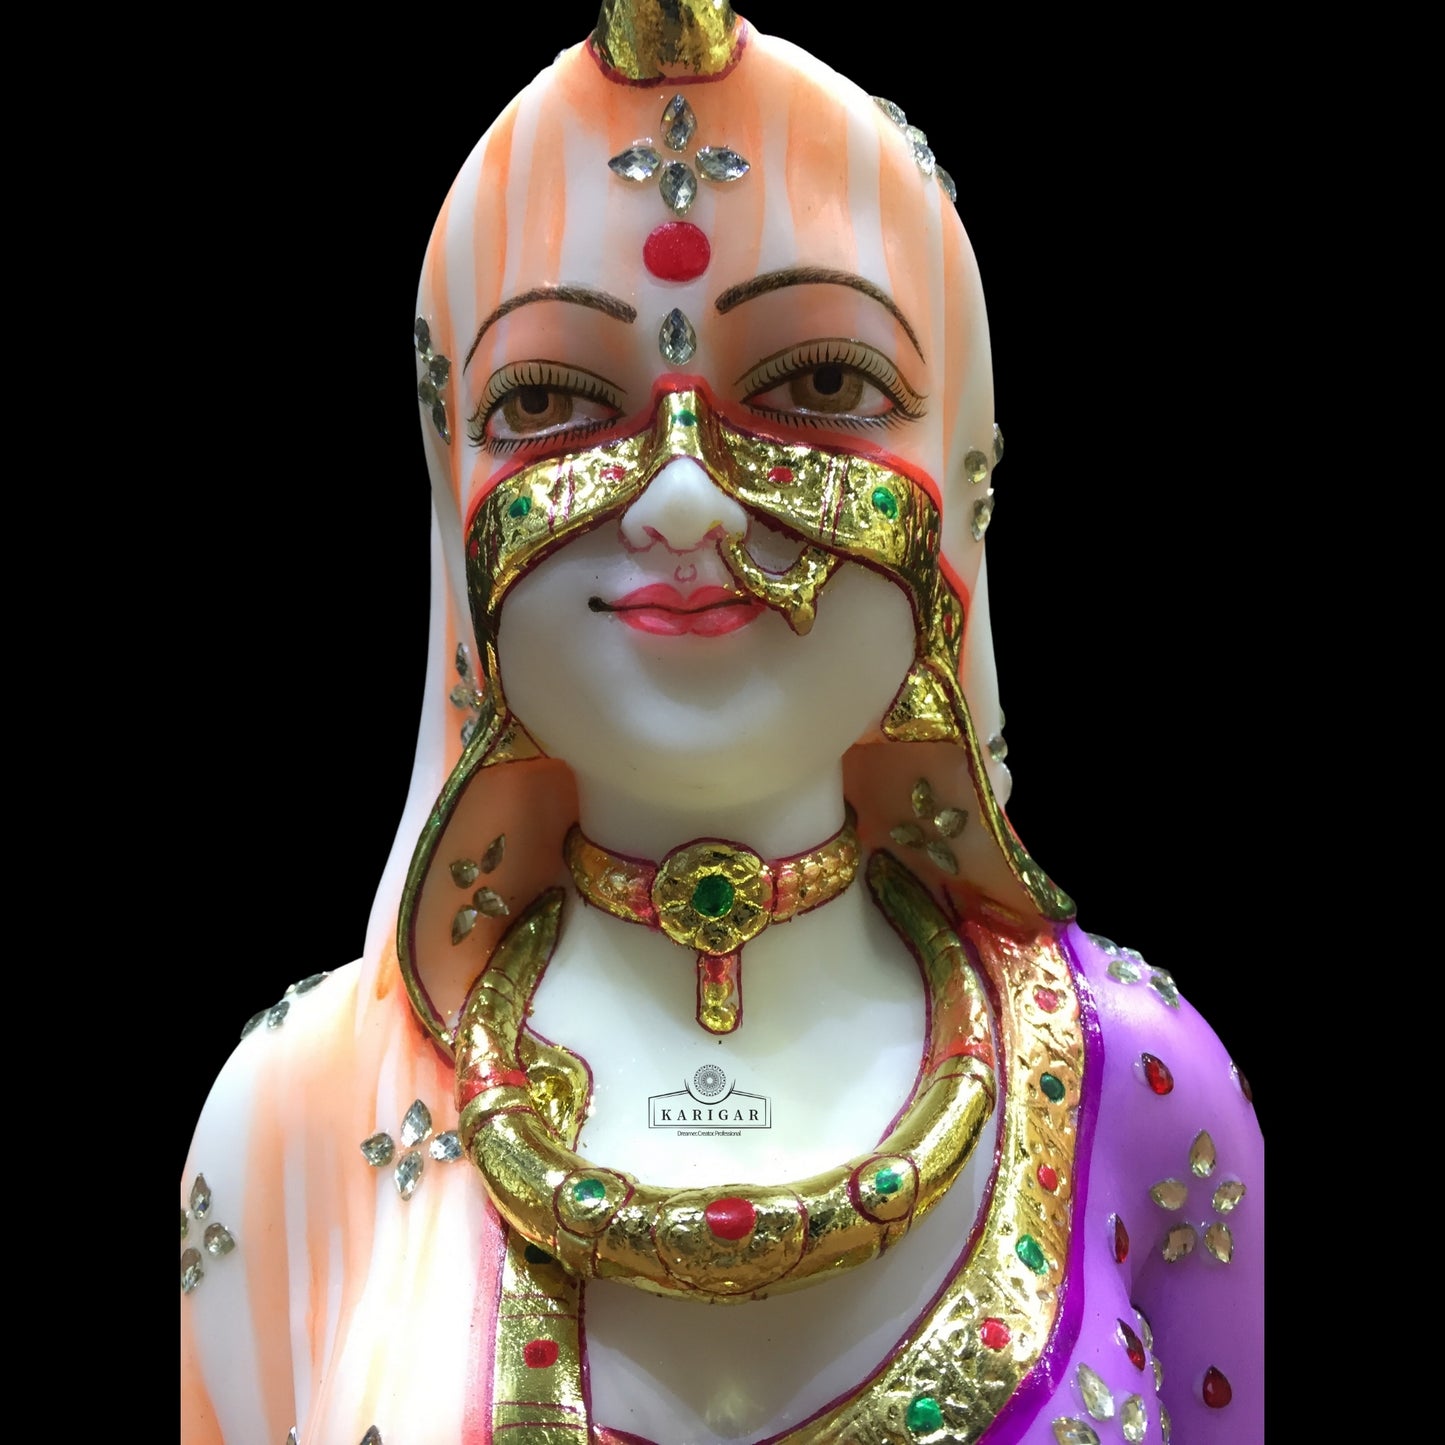 Bani Thani Bust Statue, Large 9 inches Murti, The Indian Mona Lisa Bust Marble Sculpture, Traditional Indian Women Figurine Bust, Multicolor Jewelry Clothes Figurine - Home Office Decor Gifts (Purple)